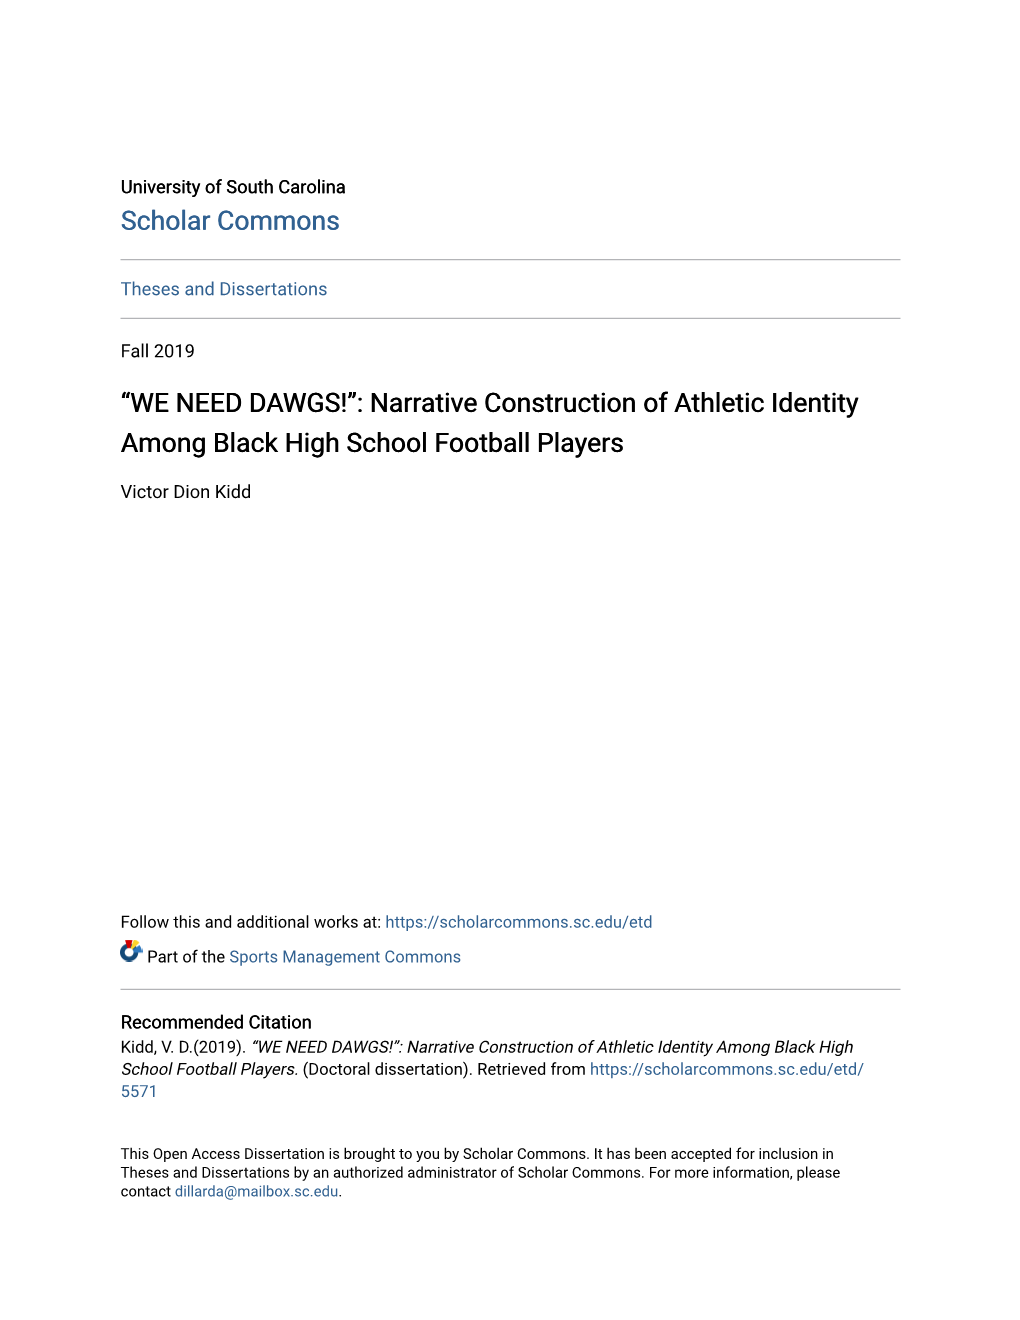 Narrative Construction of Athletic Identity Among Black High School Football Players